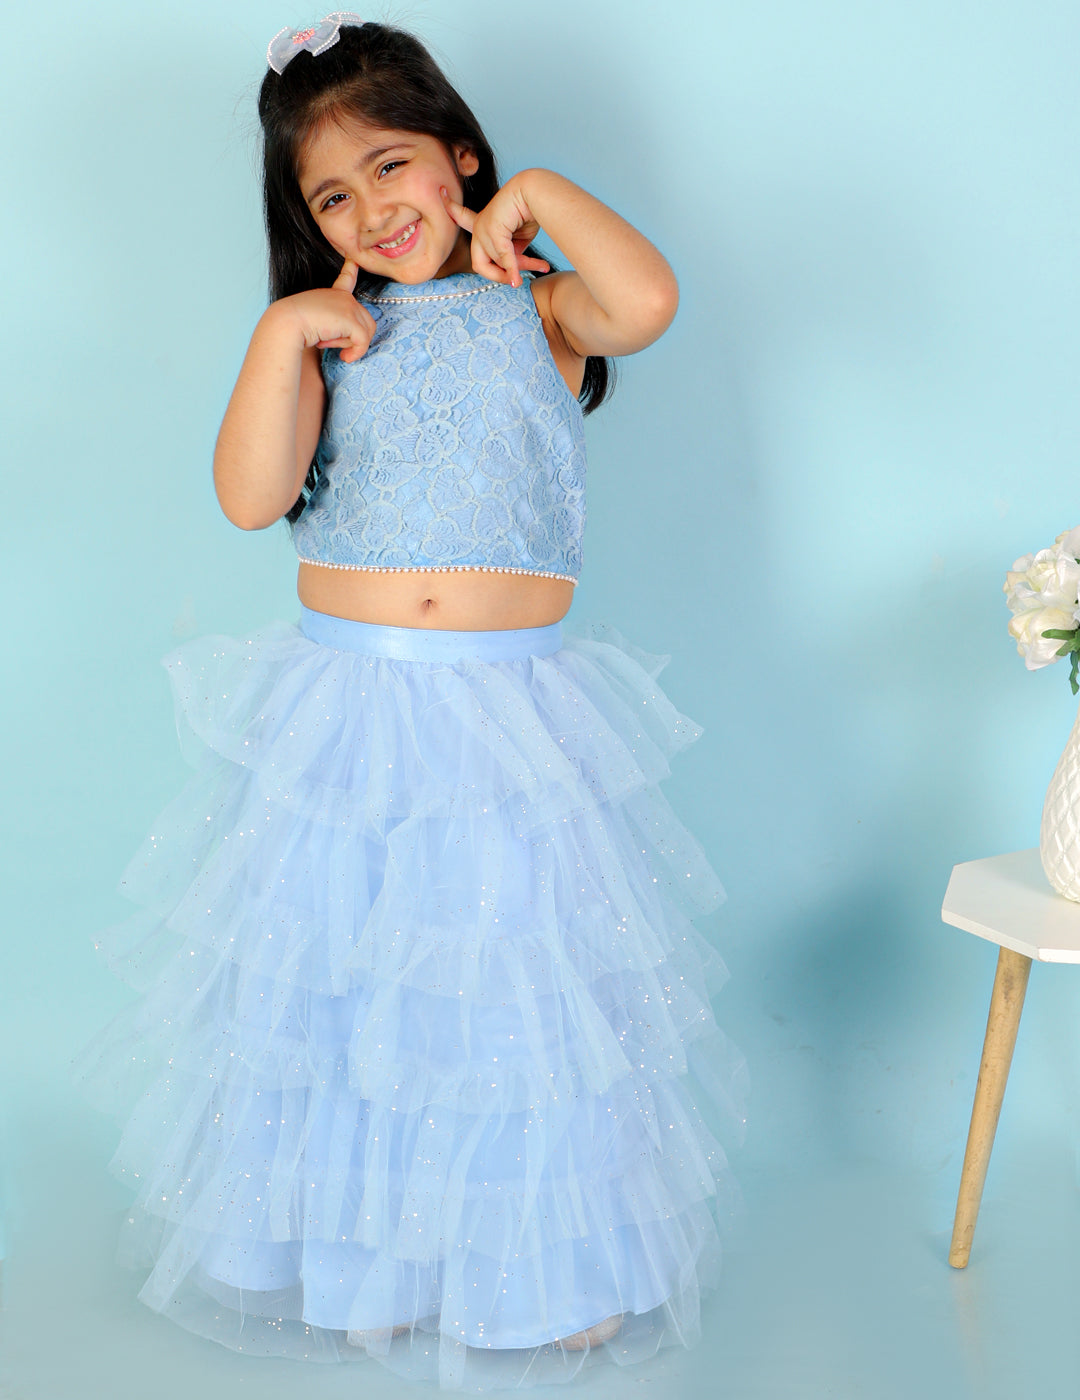 Girl's Lace Top With Pearl Detailing & Mesh Glitter Layered Skirt-Blue - Lil Peacock